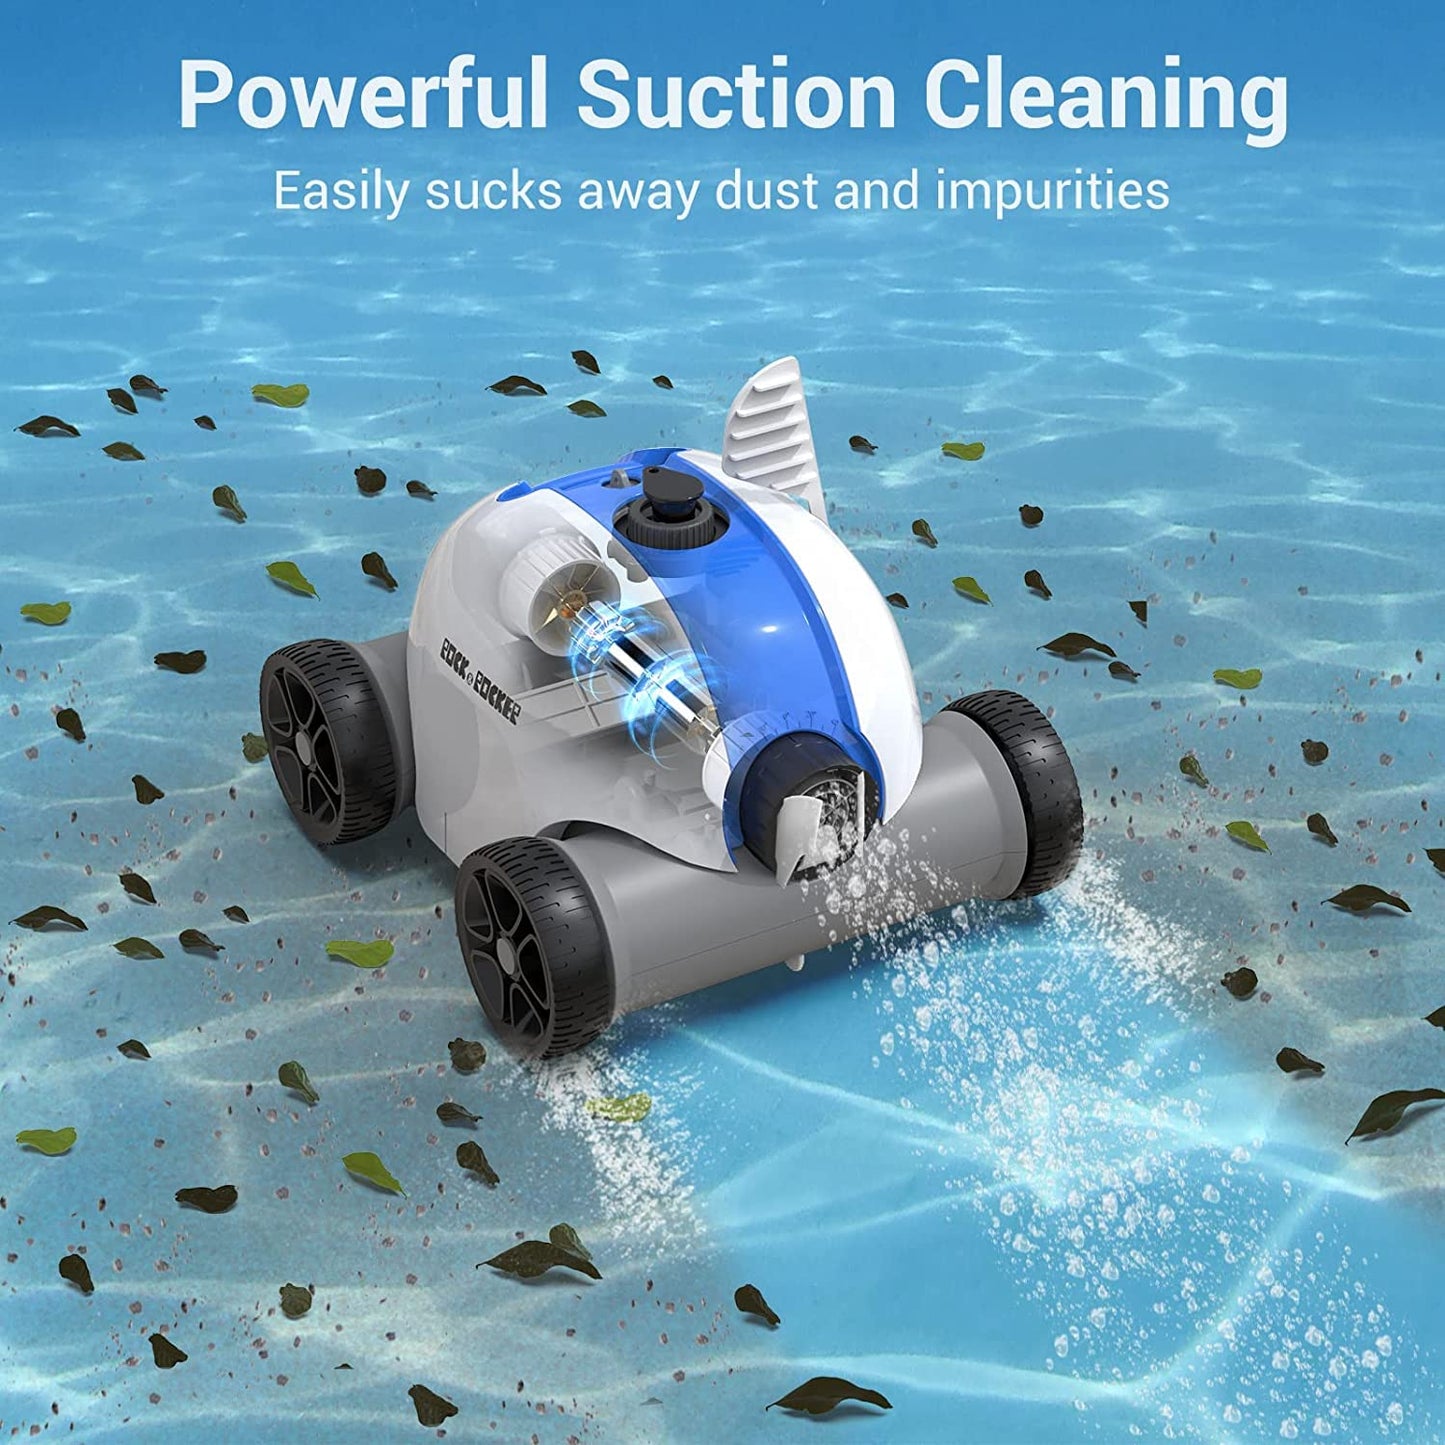 Cordless Robotic Pool Cleaner, Automatic Pool Vacuum with 60-90 Mins Working Time, Rechargeable Battery, IPX8 Waterproof for Above/In-Ground Swimming Pools Up to 861 Sq Ft